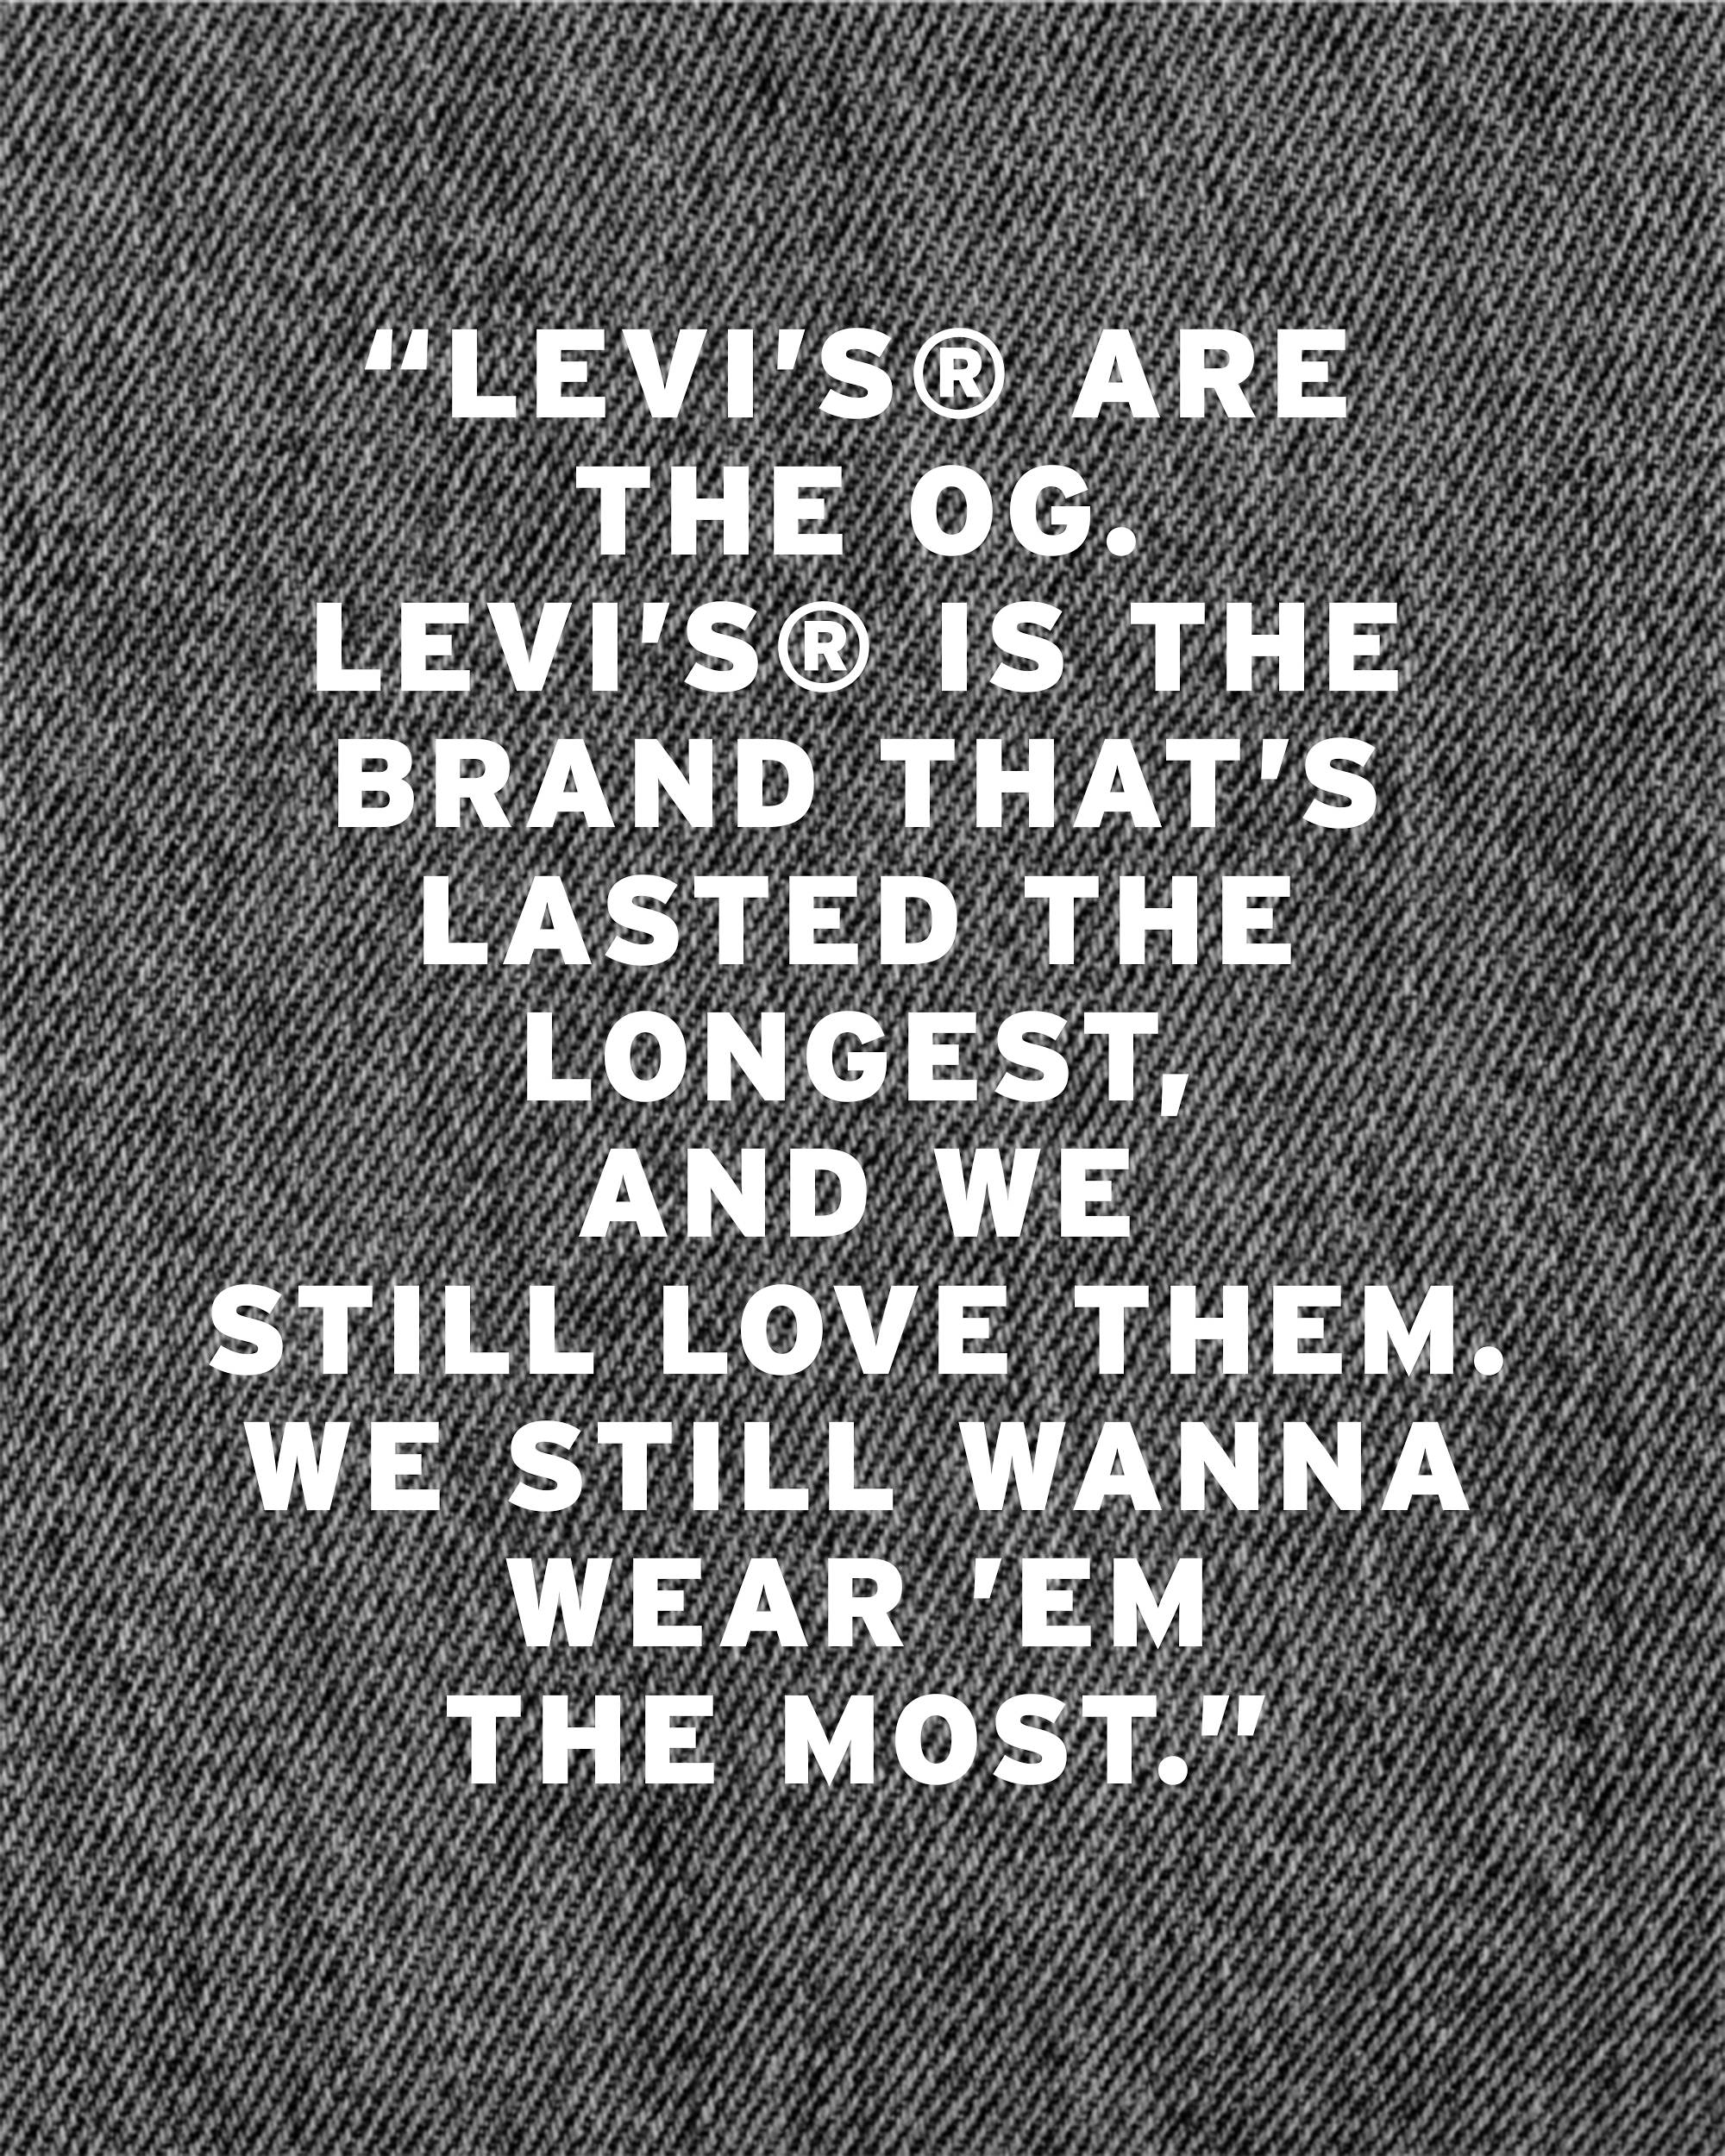 Quoted graphic text to read: "Levi’s® are the OG. Levi’s® is the brand that’s lasted the longest, and we still love them. We still wanna wear ’em the most."